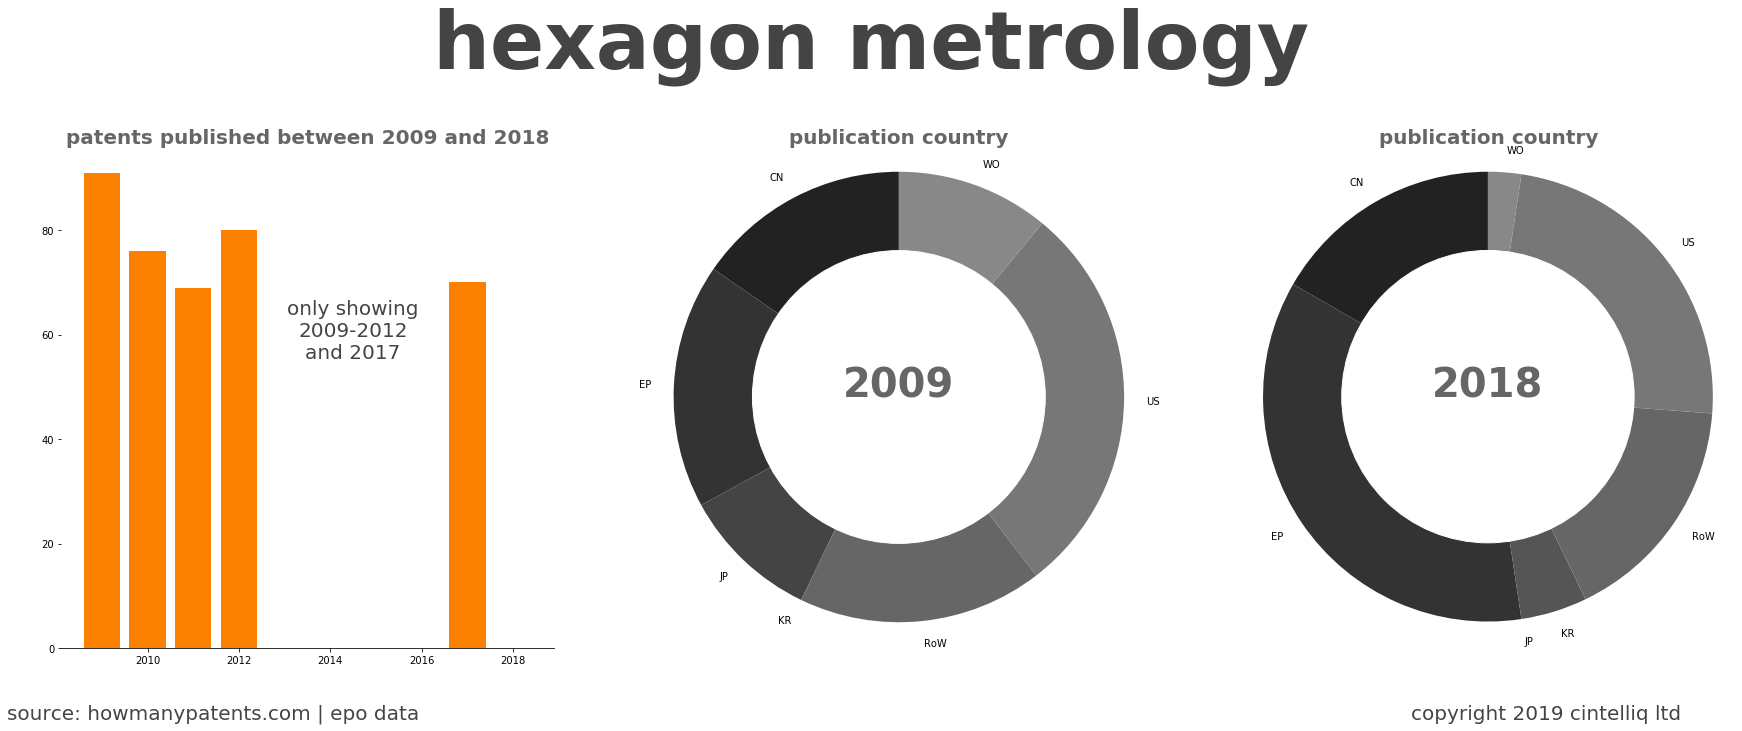 summary of patents for Hexagon Metrology